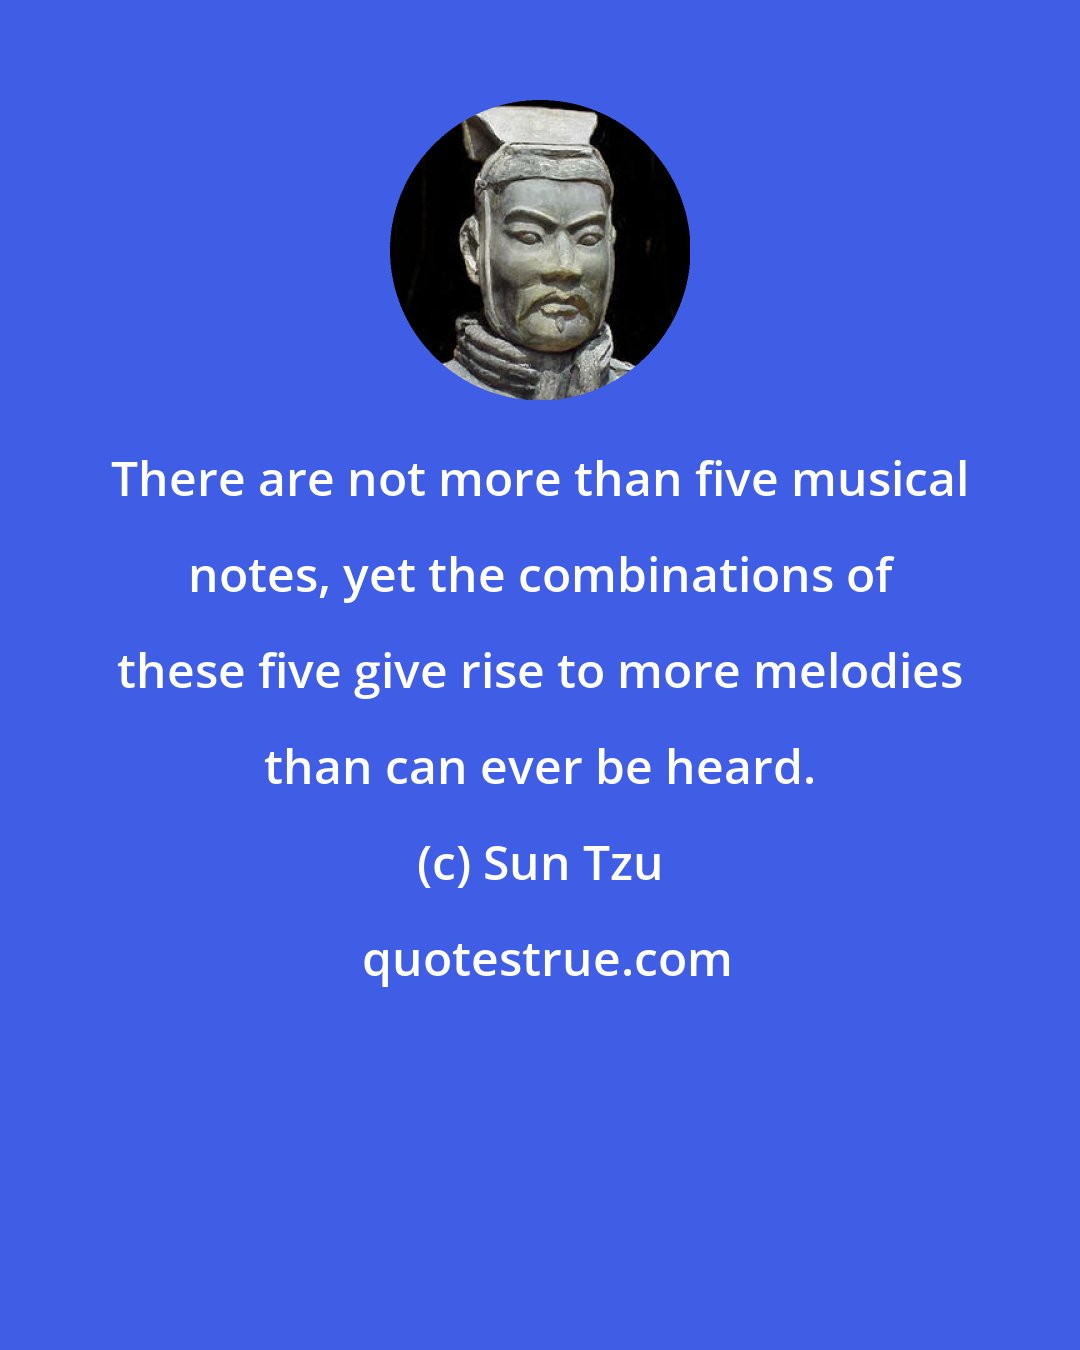 Sun Tzu: There are not more than five musical notes, yet the combinations of these five give rise to more melodies than can ever be heard.